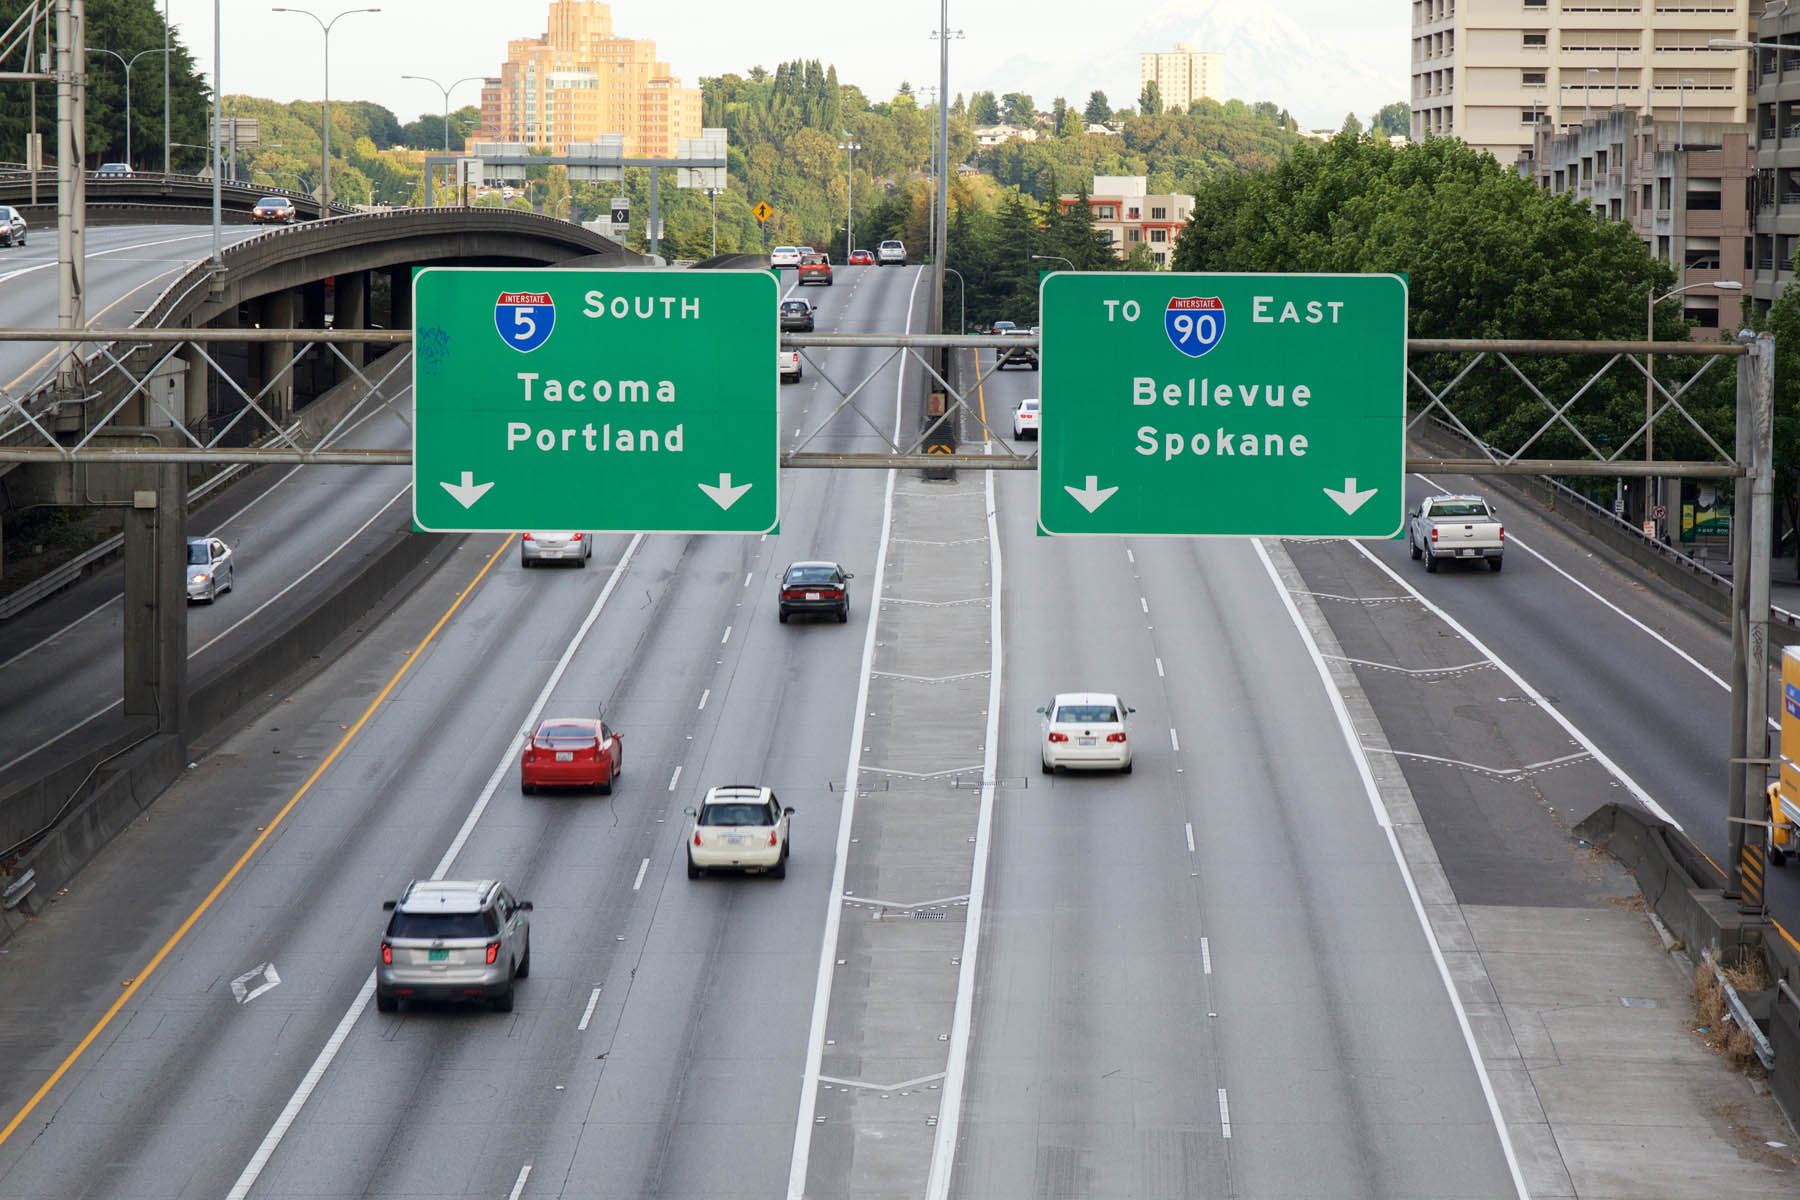 View of I5 South with the Tacoma, Portland, Bellevue and Spokane directional sign